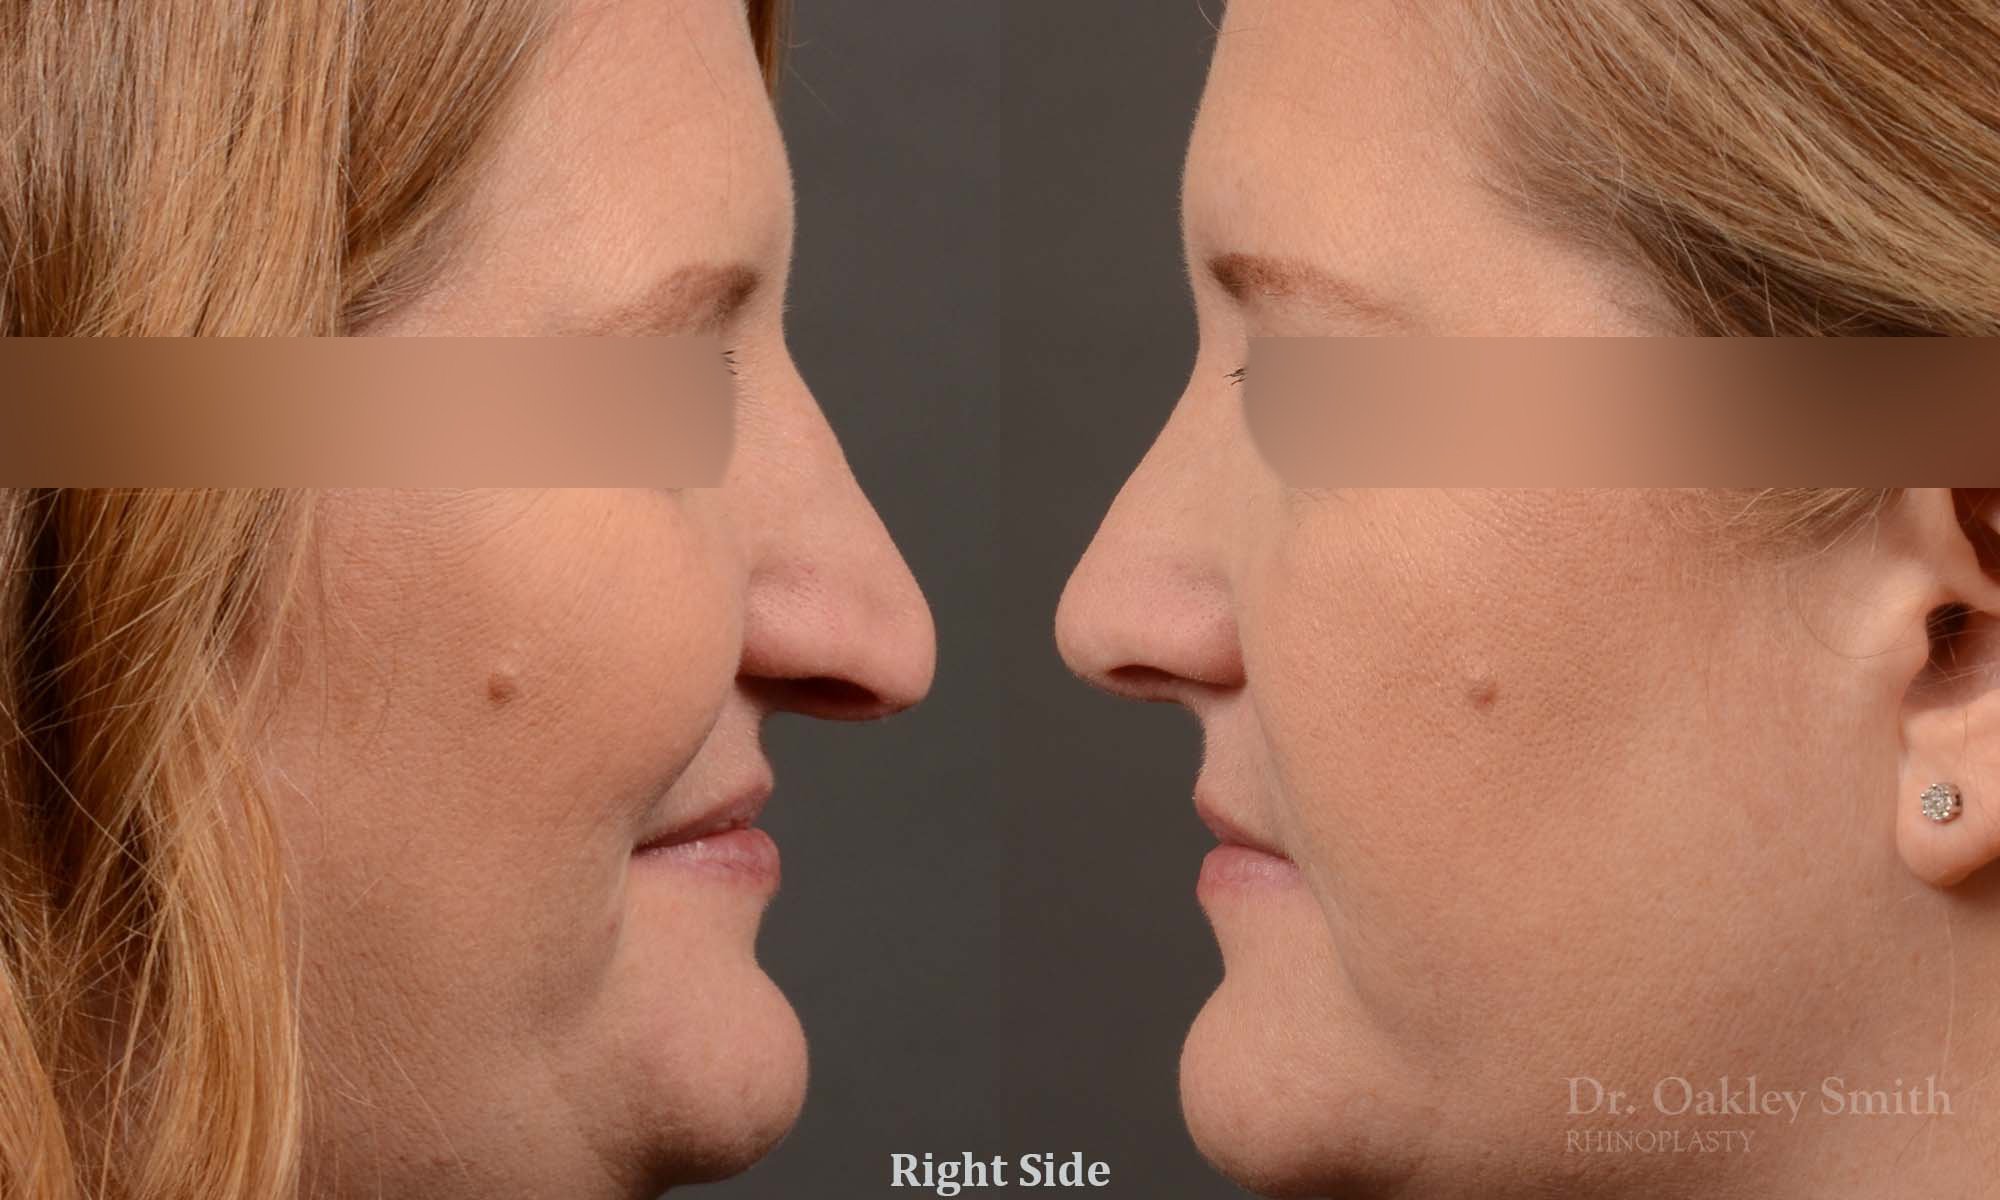 Rhinoplasty - Rhinoplasty Before and After – Case 489